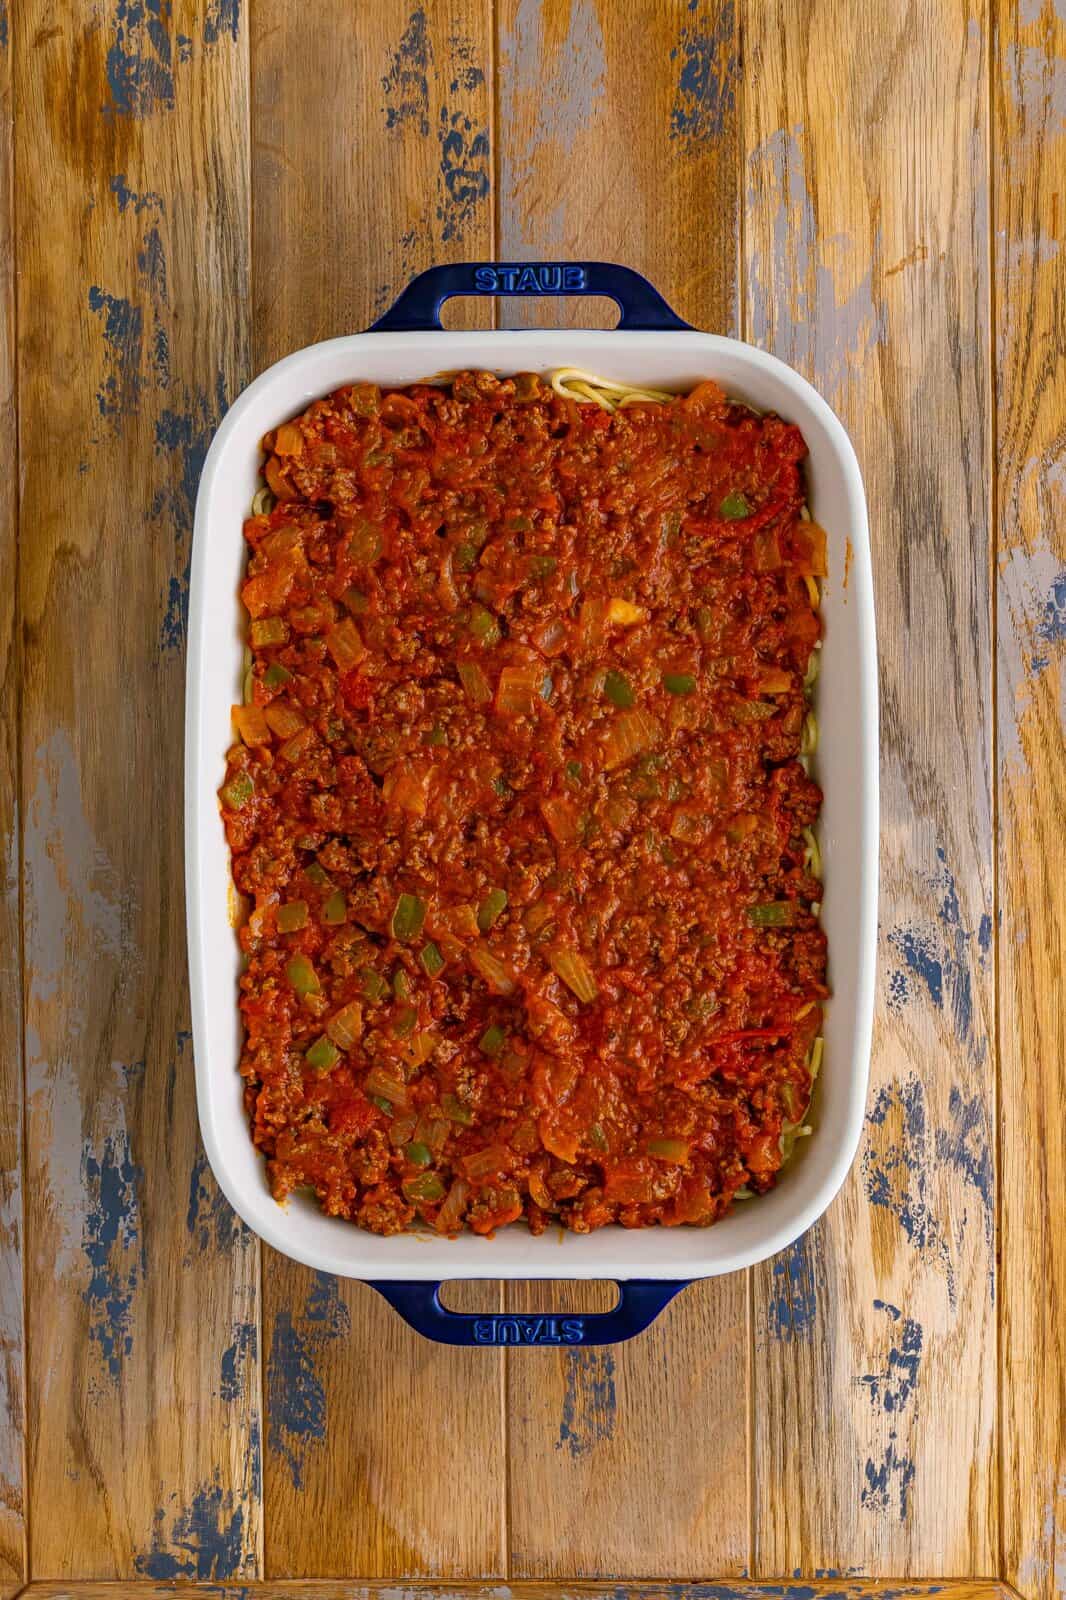 meat sauce spread evenly over spaghetti noodles in a casserole dish.